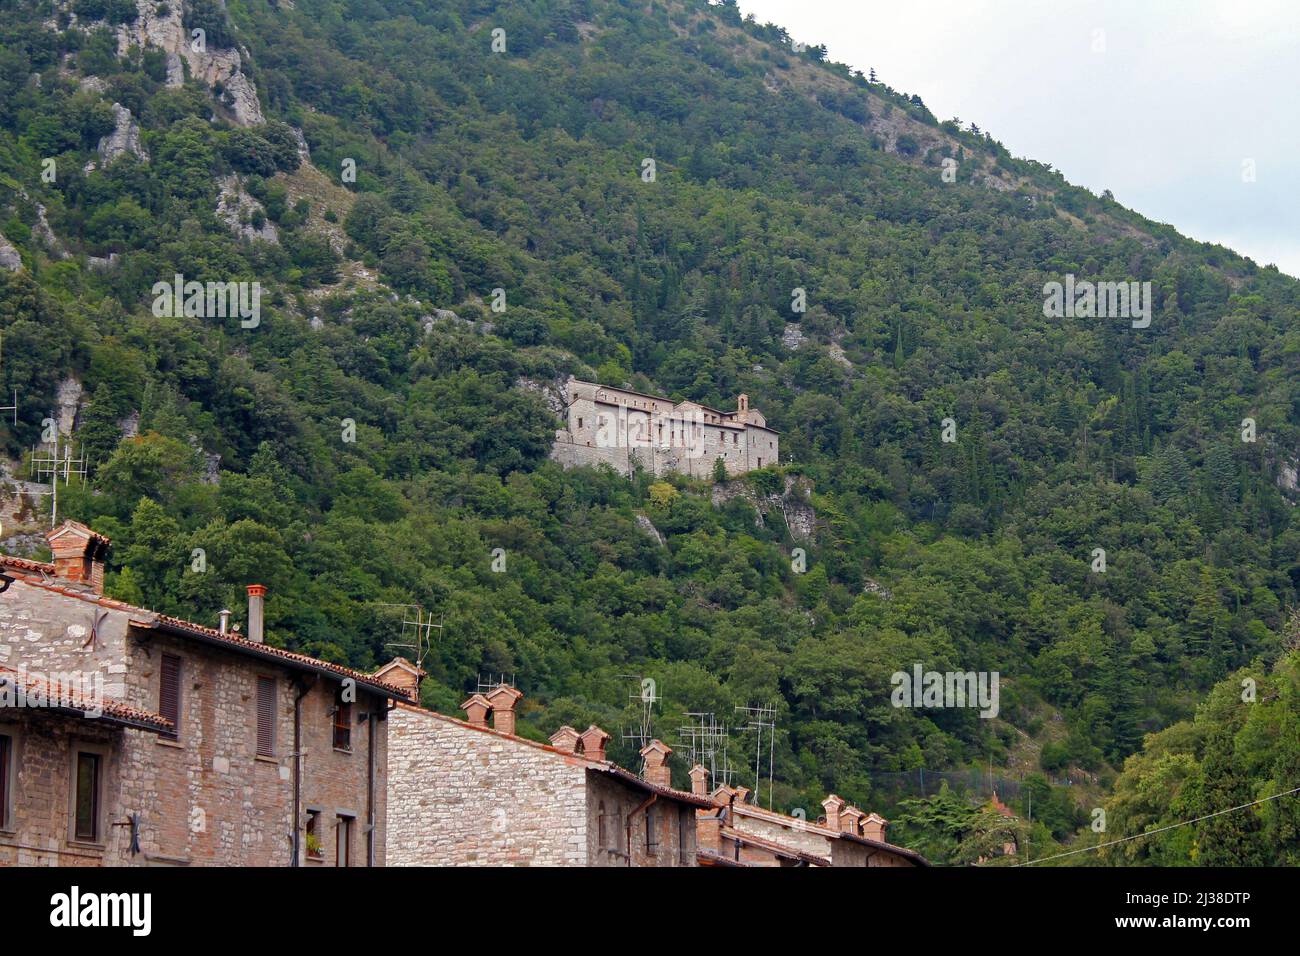 The traditional village on the cliff among the trees in Umbria in Italy Stock Photo